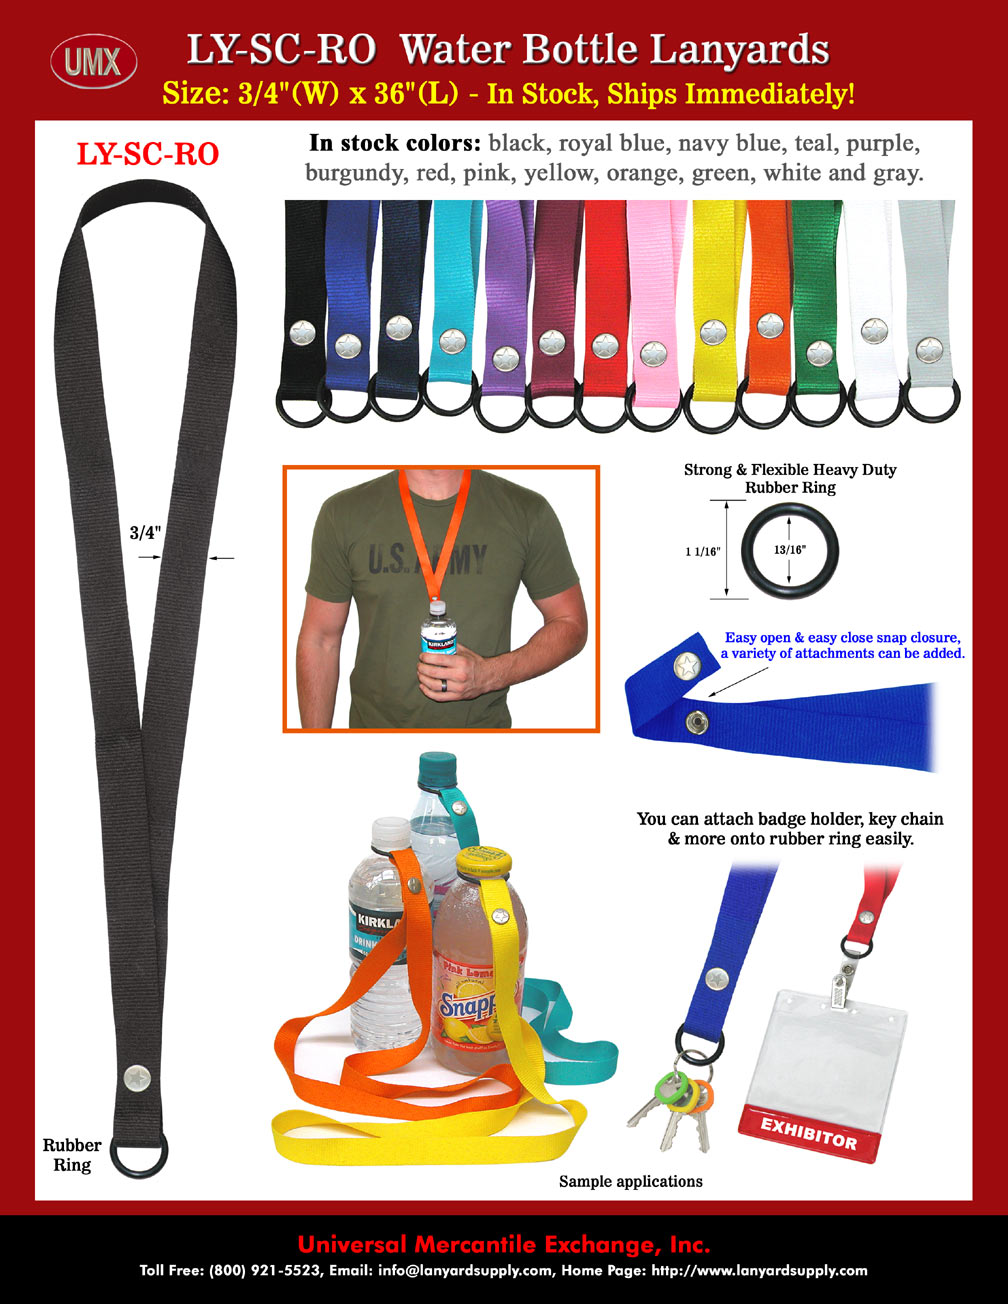 Bottle Cap Lanyards - 3/4" Low Cost Easy-Snap-On Bottle Cap Lanyards For Bottle Drinks